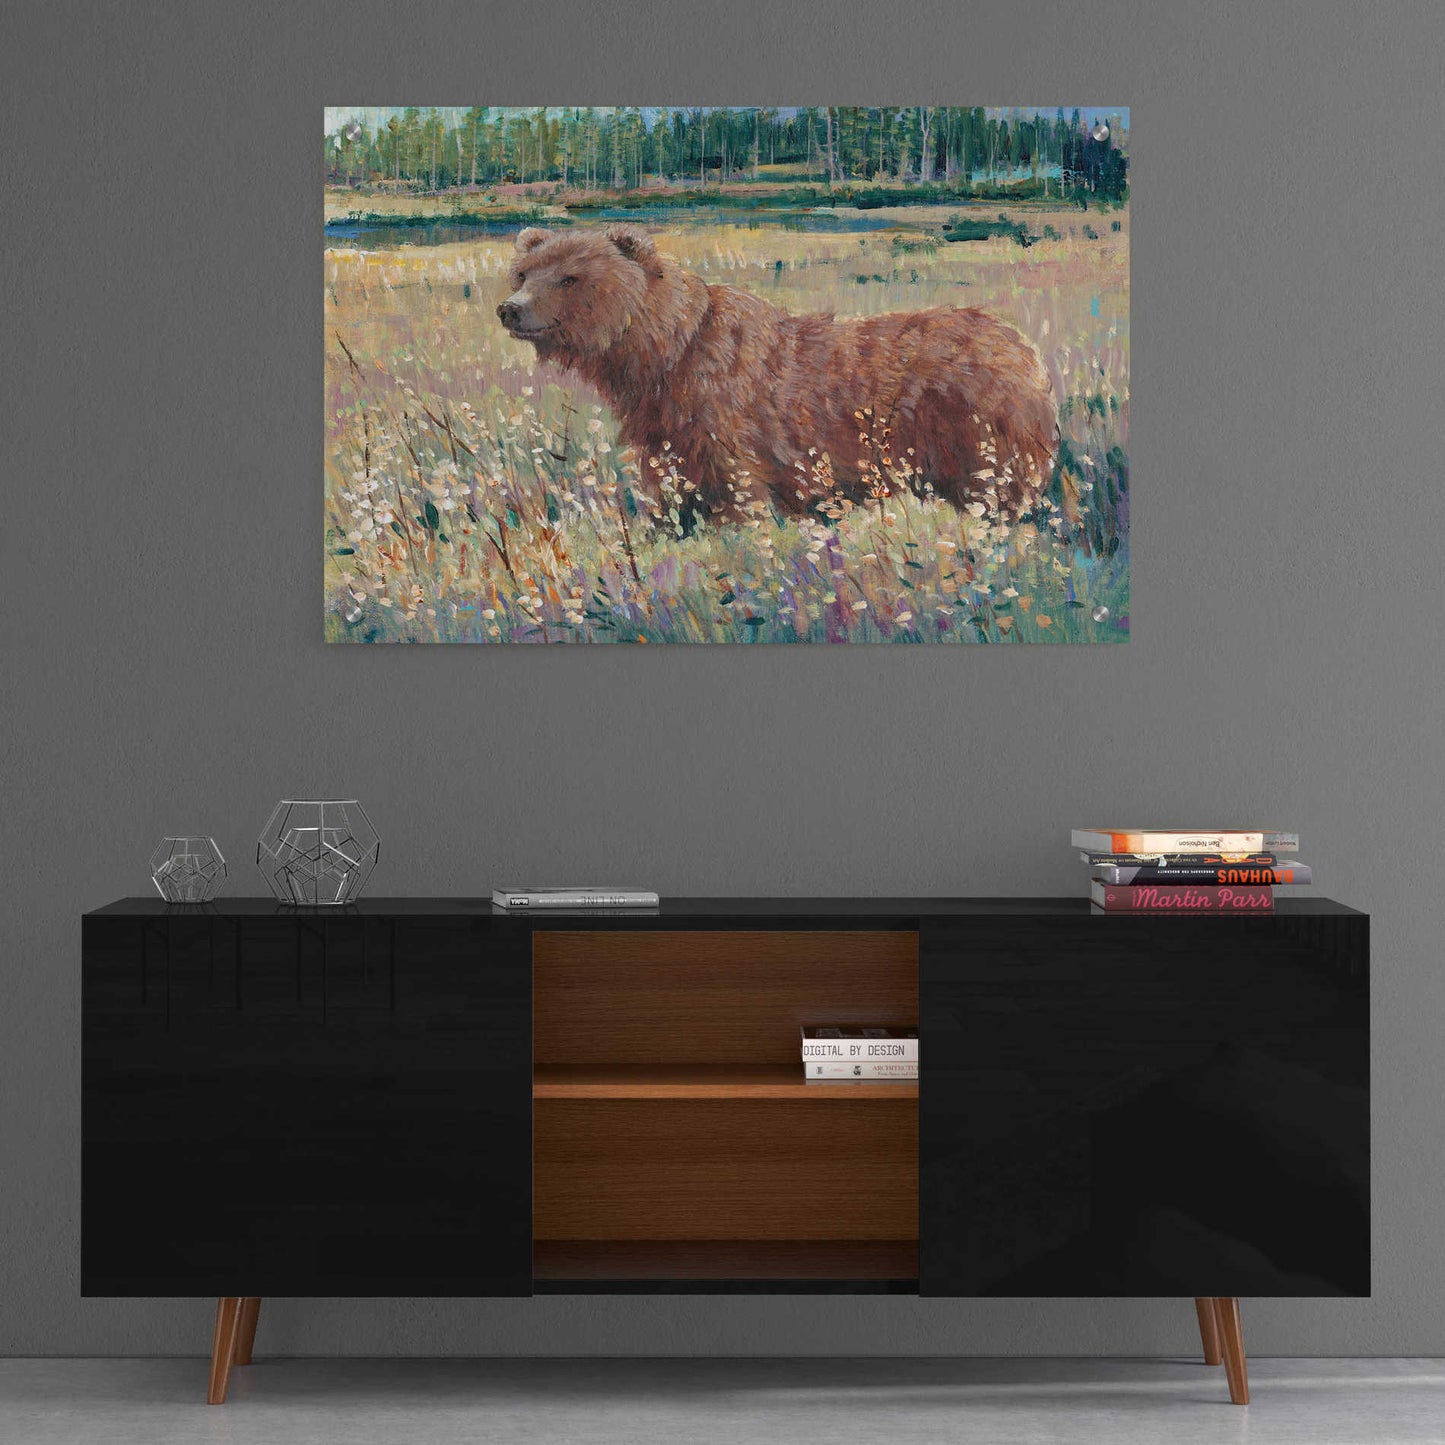 Epic Art 'Bear in the Field' by Tim O'Toole, Acrylic Glass Wall Art,36x24